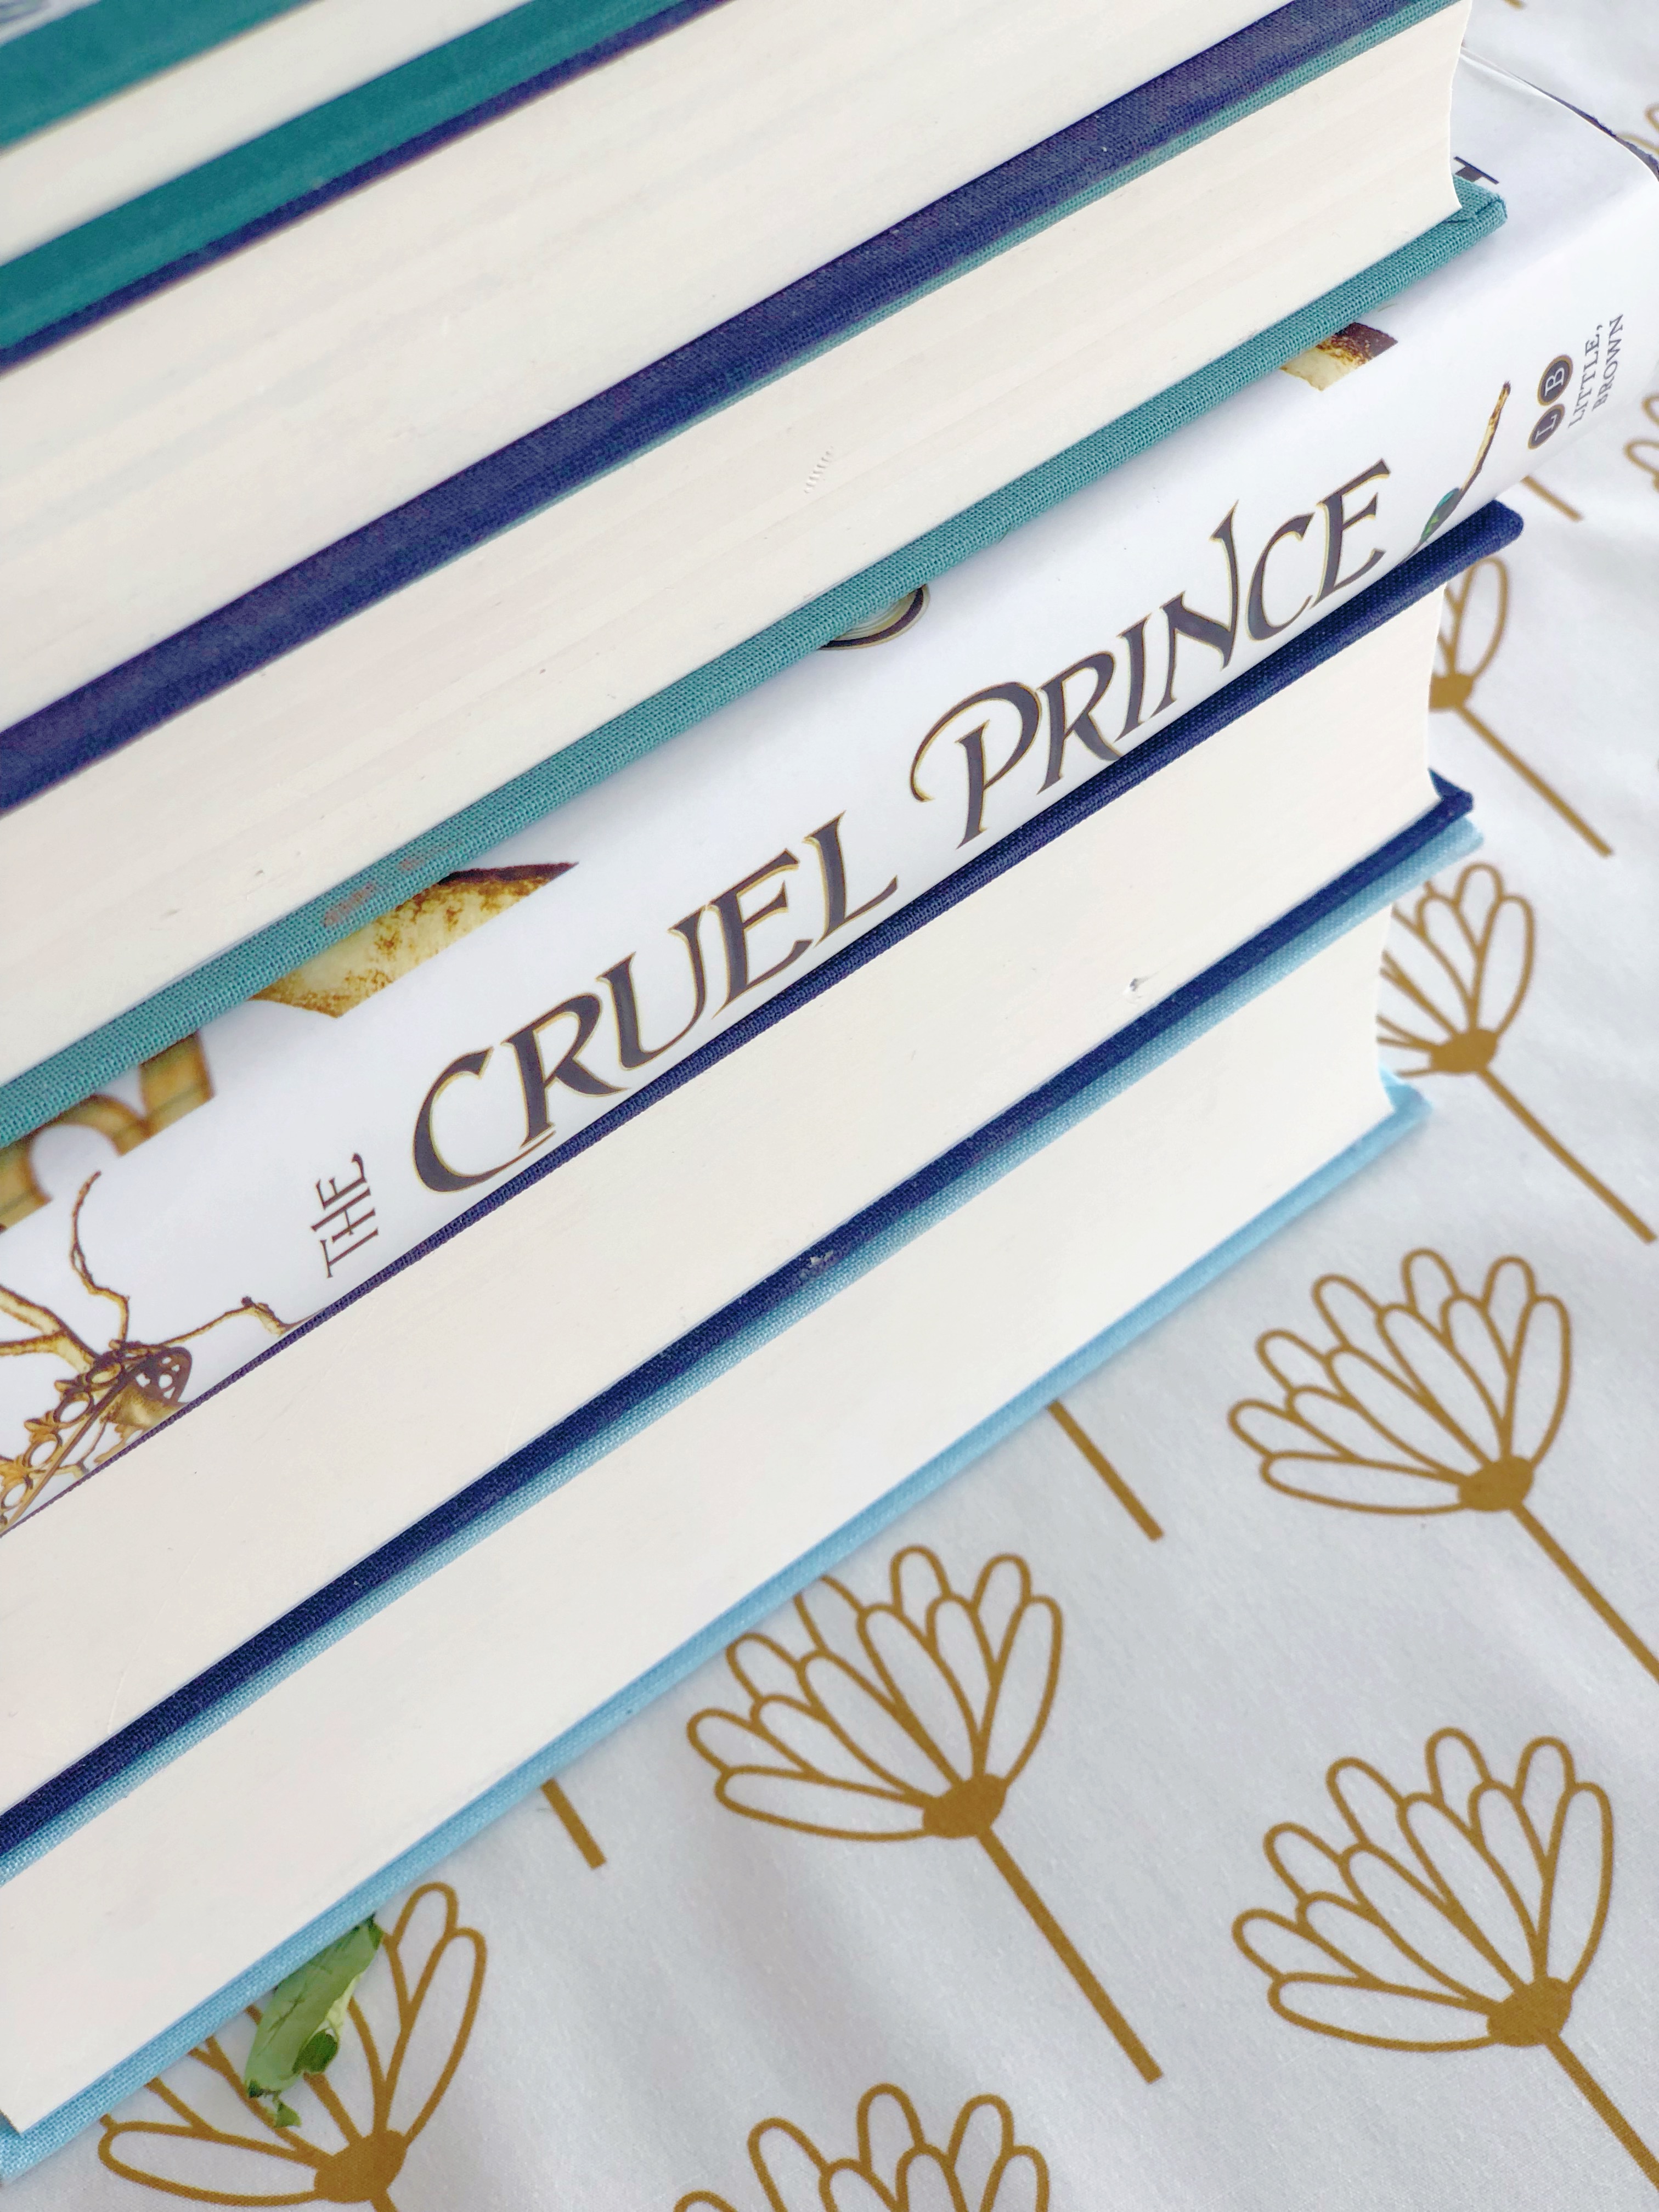 The Cruel Prince by Holly Black: A Review by Amanda of A Crafty Fox